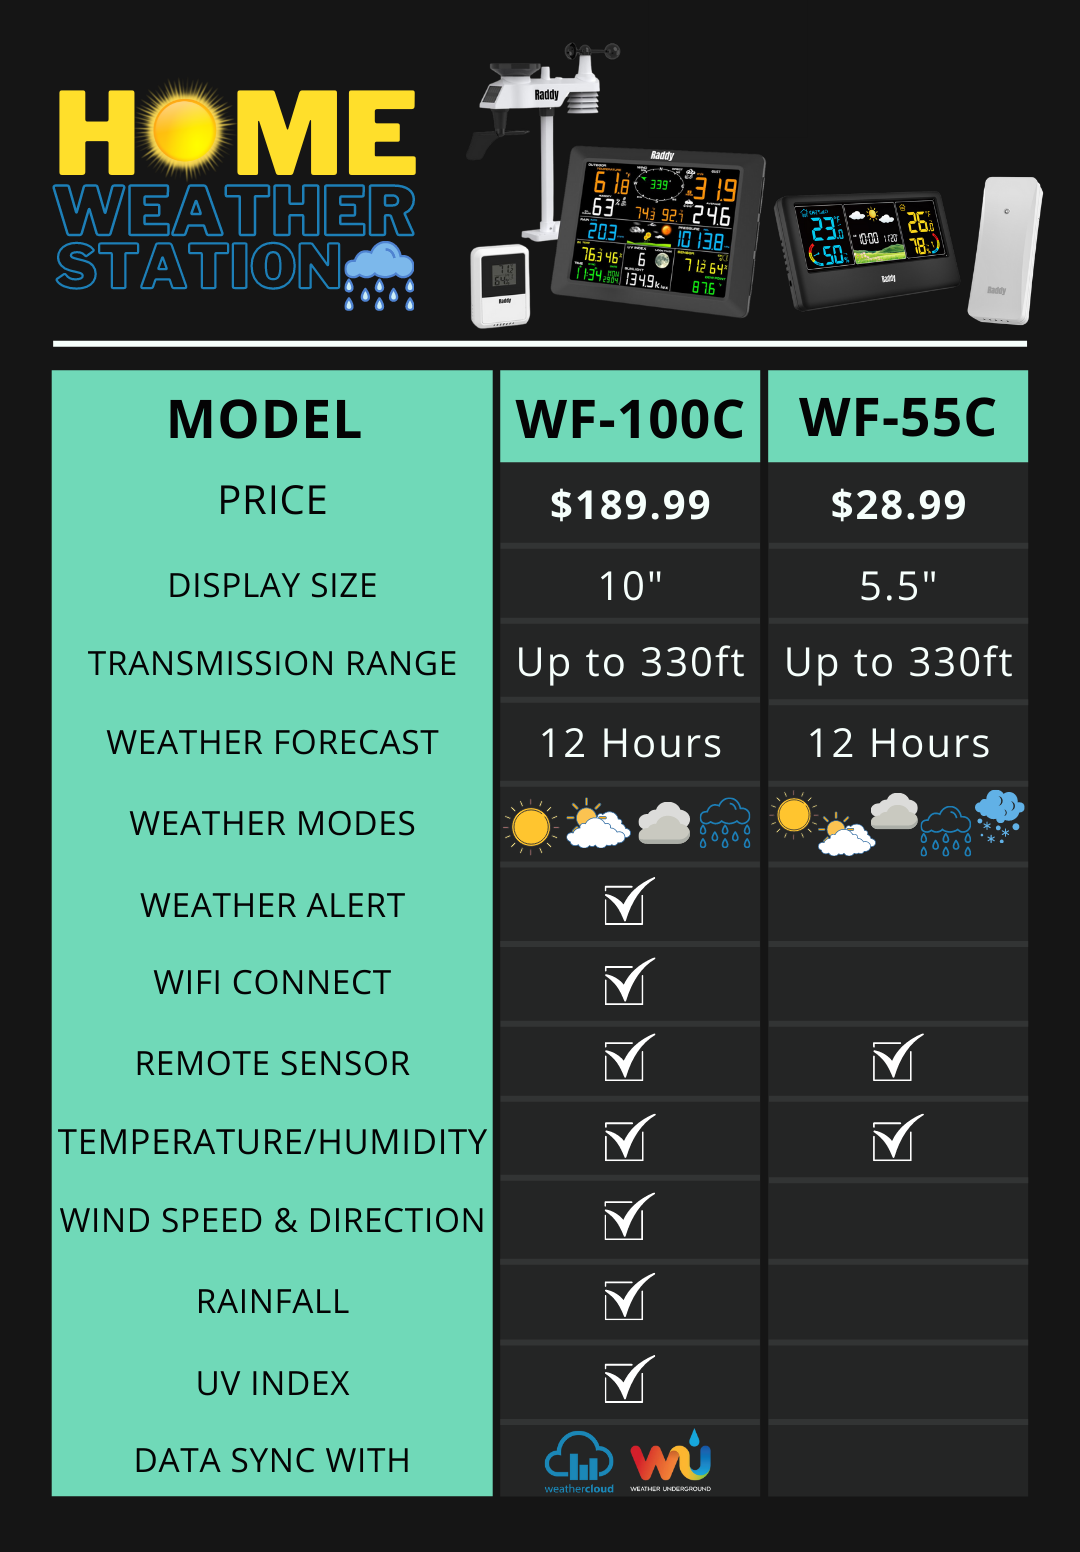 Raddy WF-55C PRO Weather Station with Wireless Remote Sensor, Thermometer  Hygrometer Barometer, Alarm Clock, Weather Forecast, Color Display for